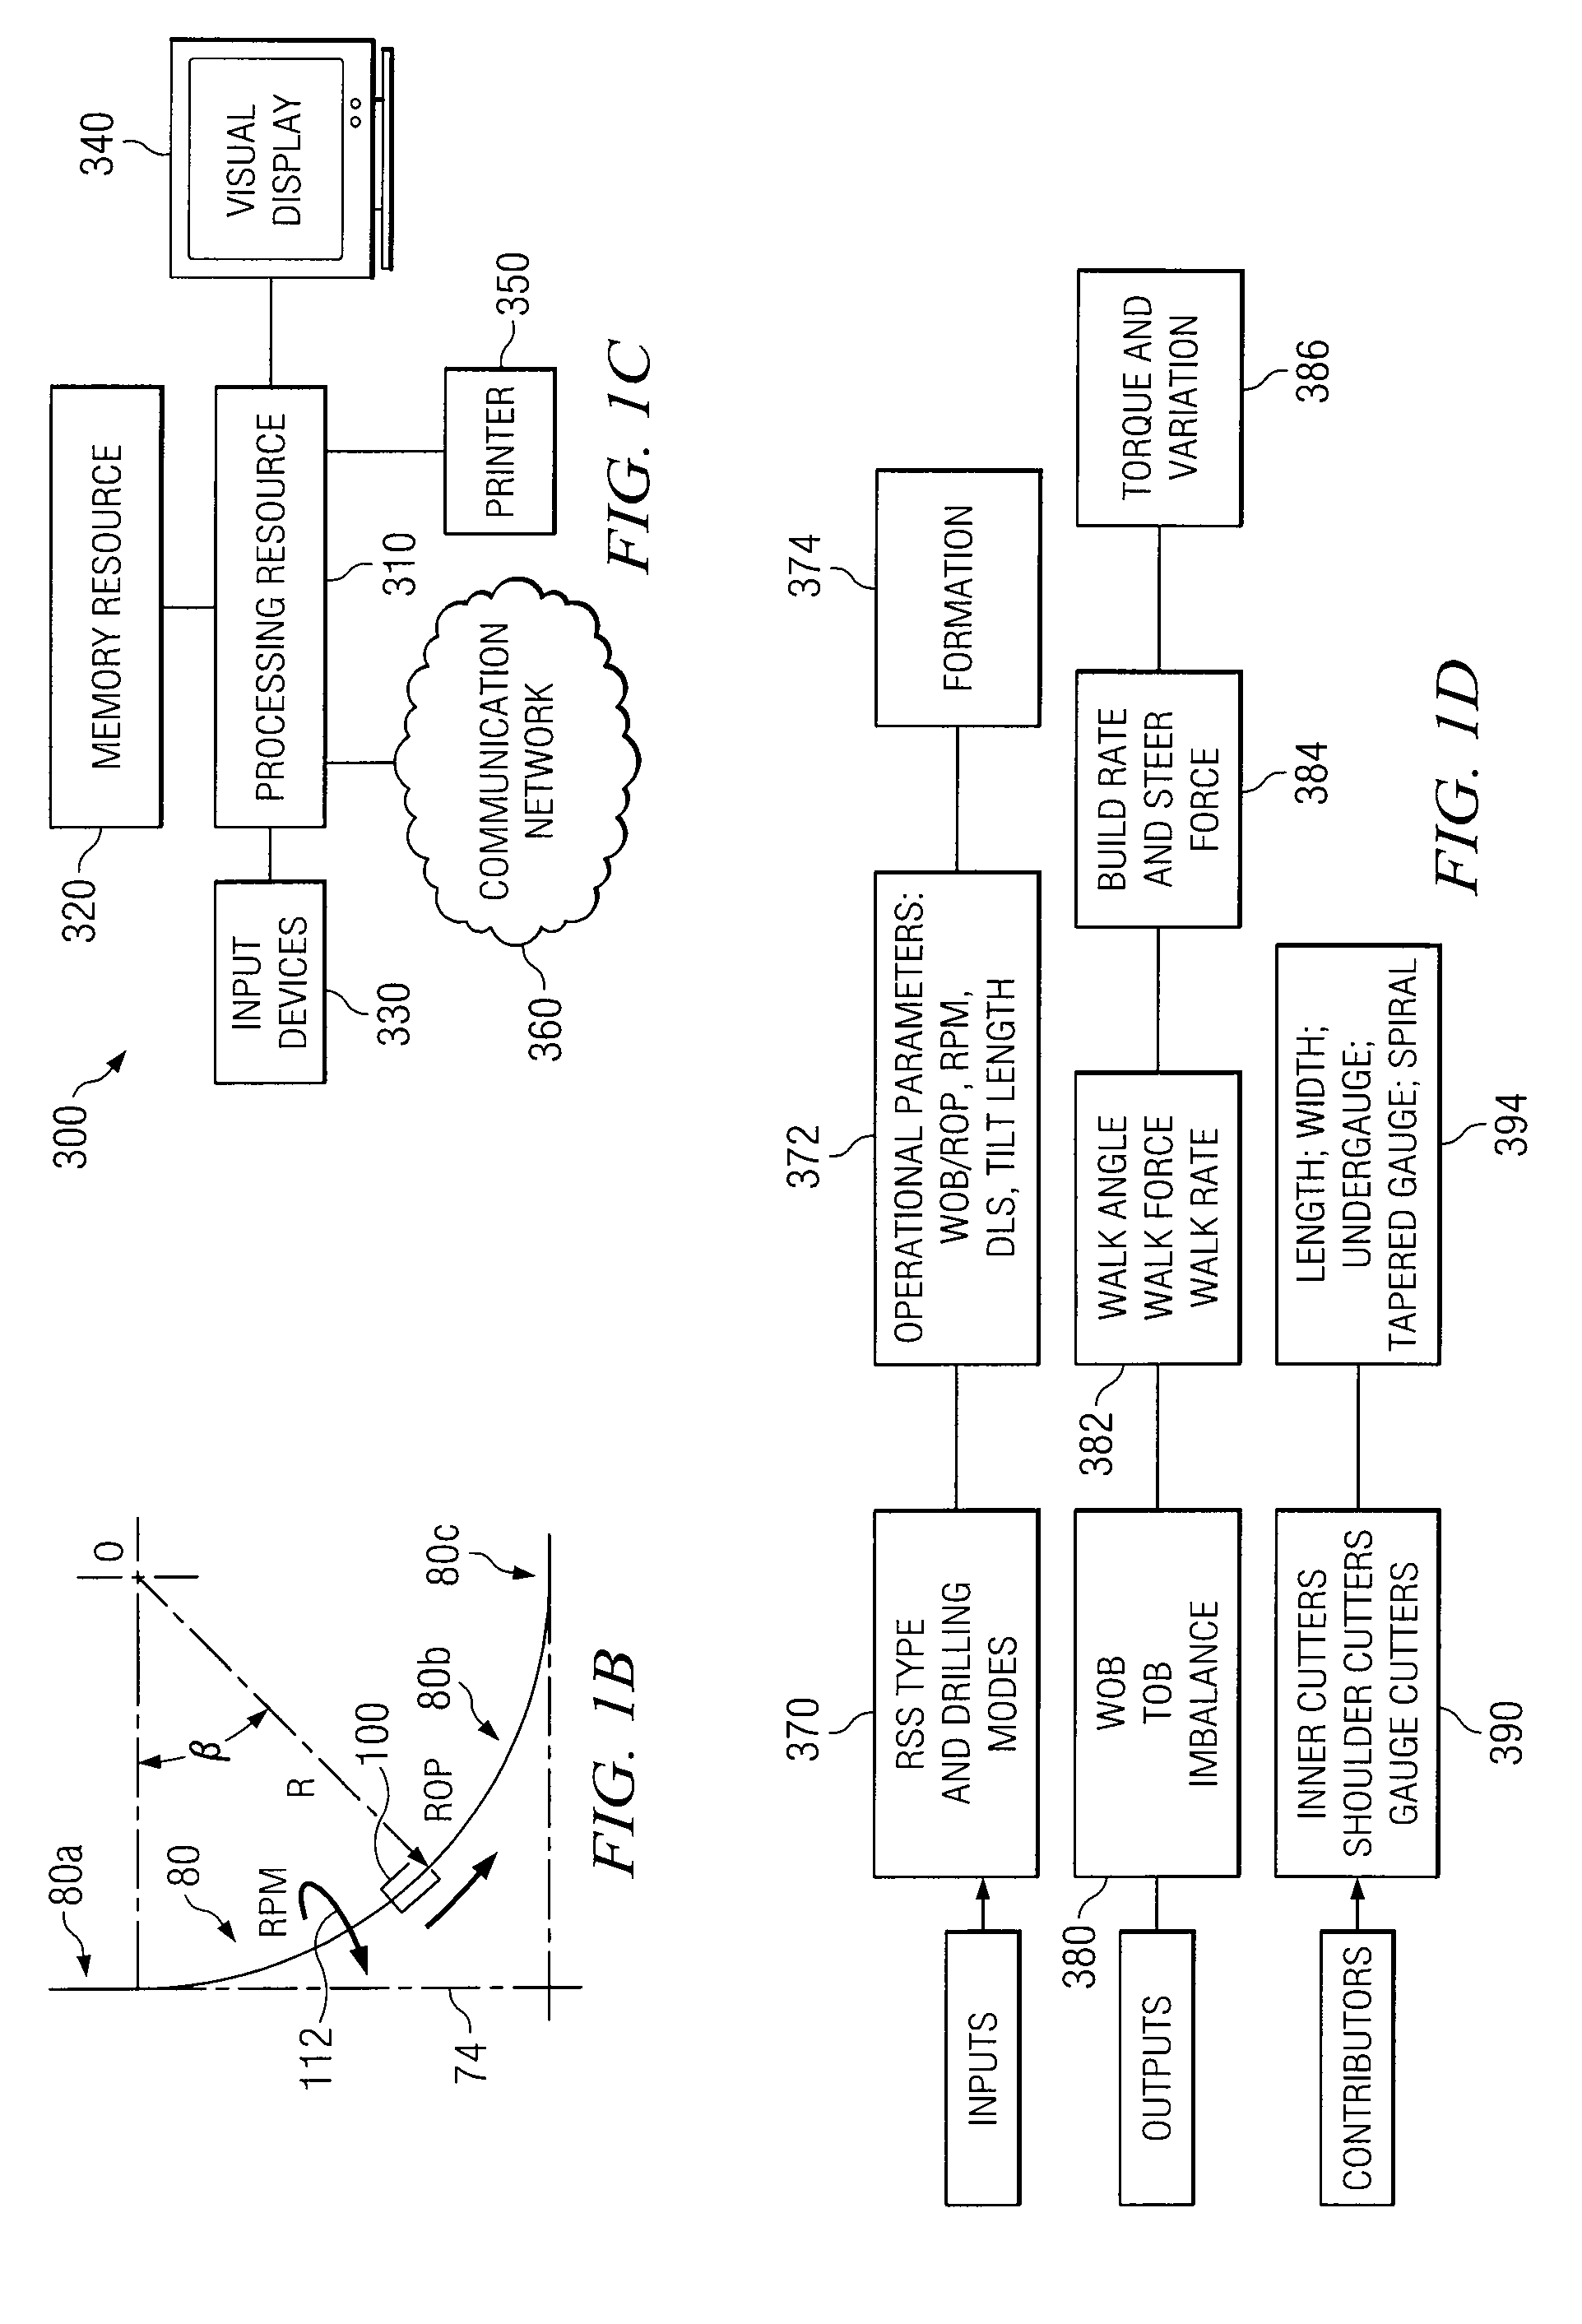 Methods and systems to predict rotary drill bit walk and to design rotary drill bits and other downhole tools